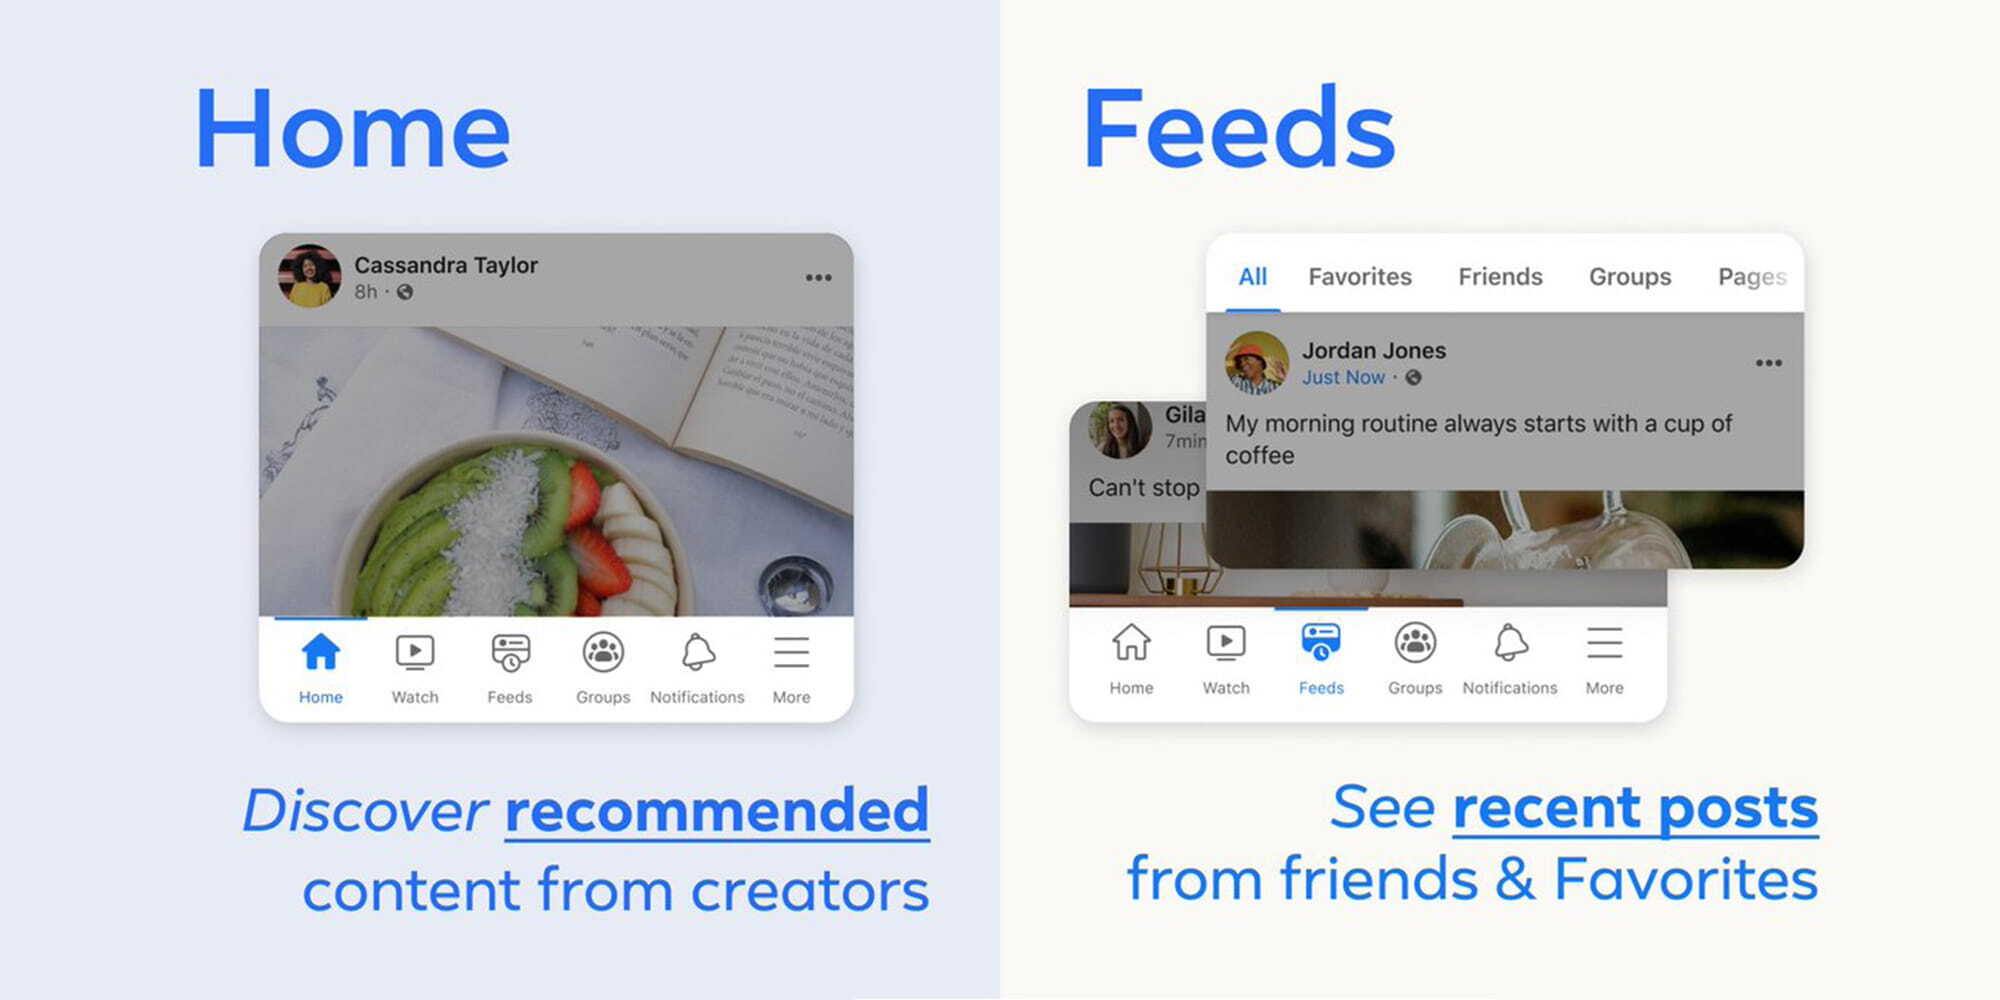 Facebook launches 'Feeds' tab that shows users newest posts first